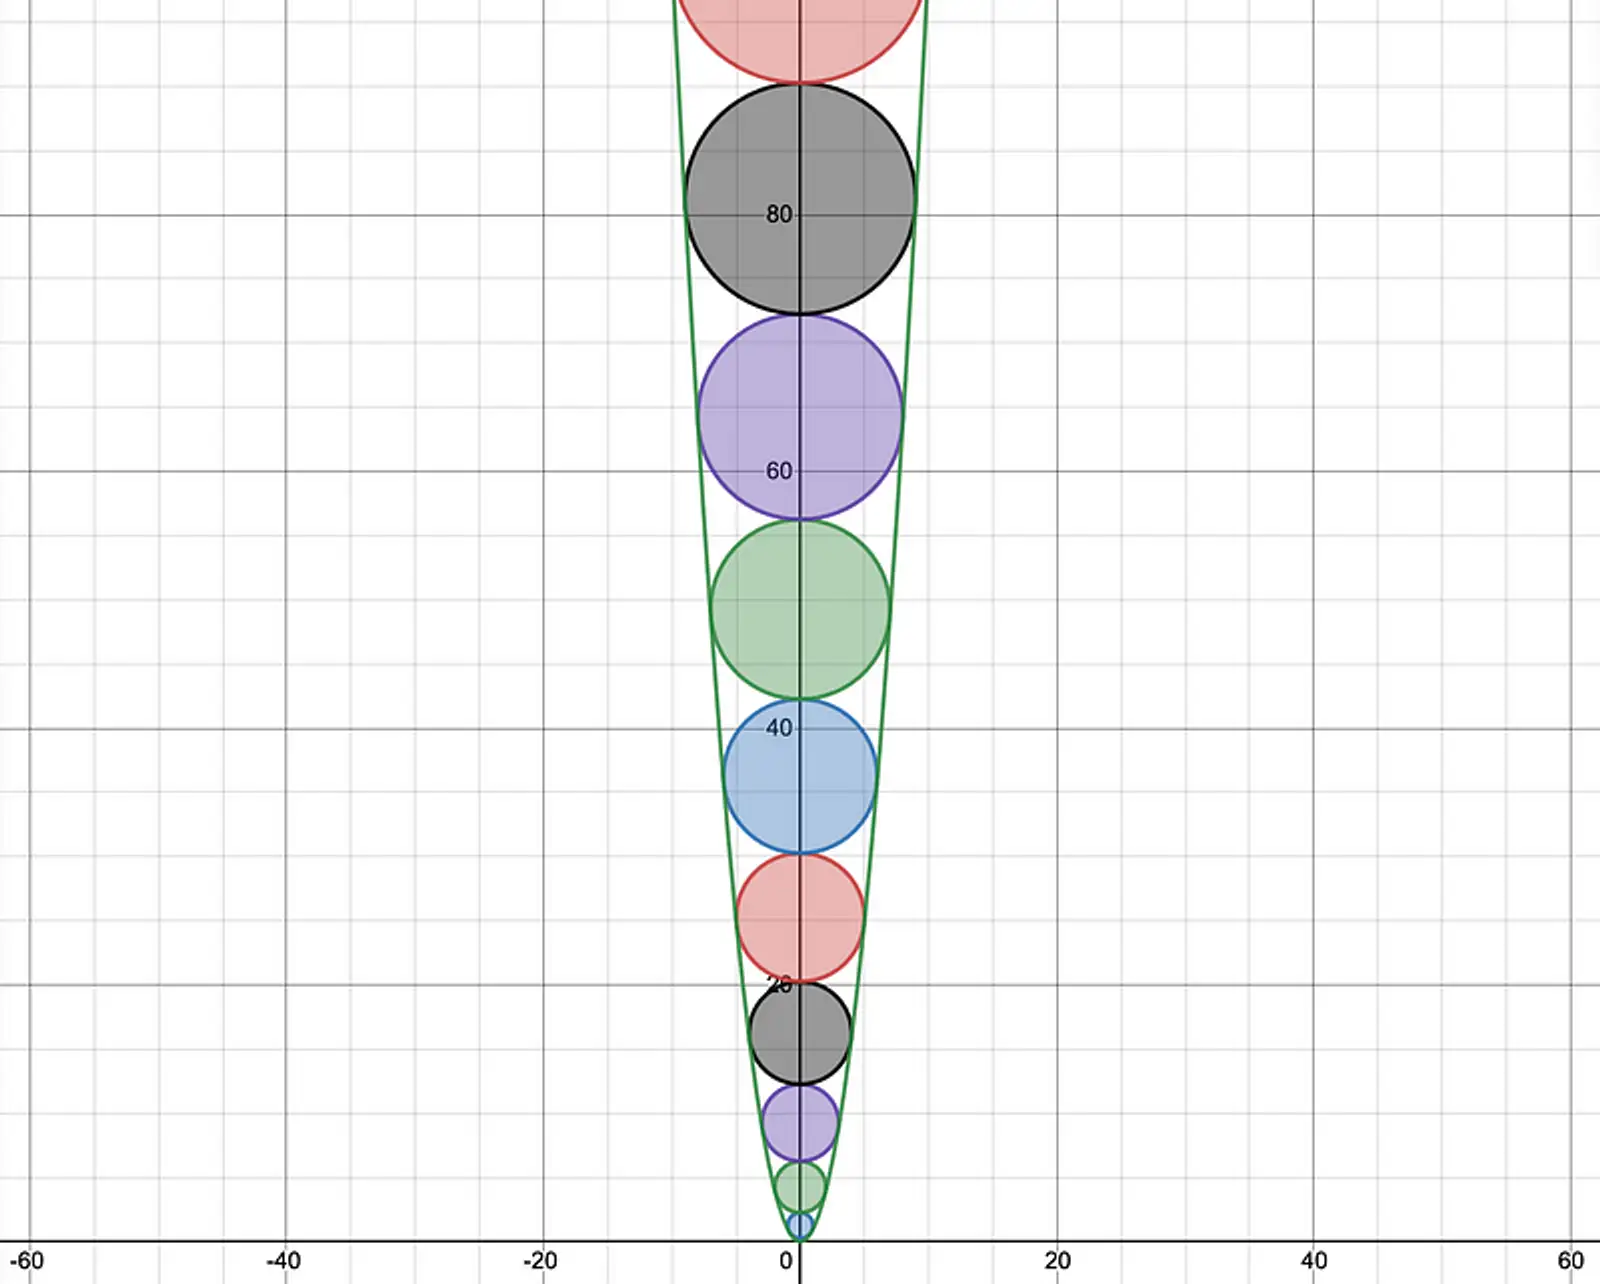 Final visualization of inscribed circles in standard parabola